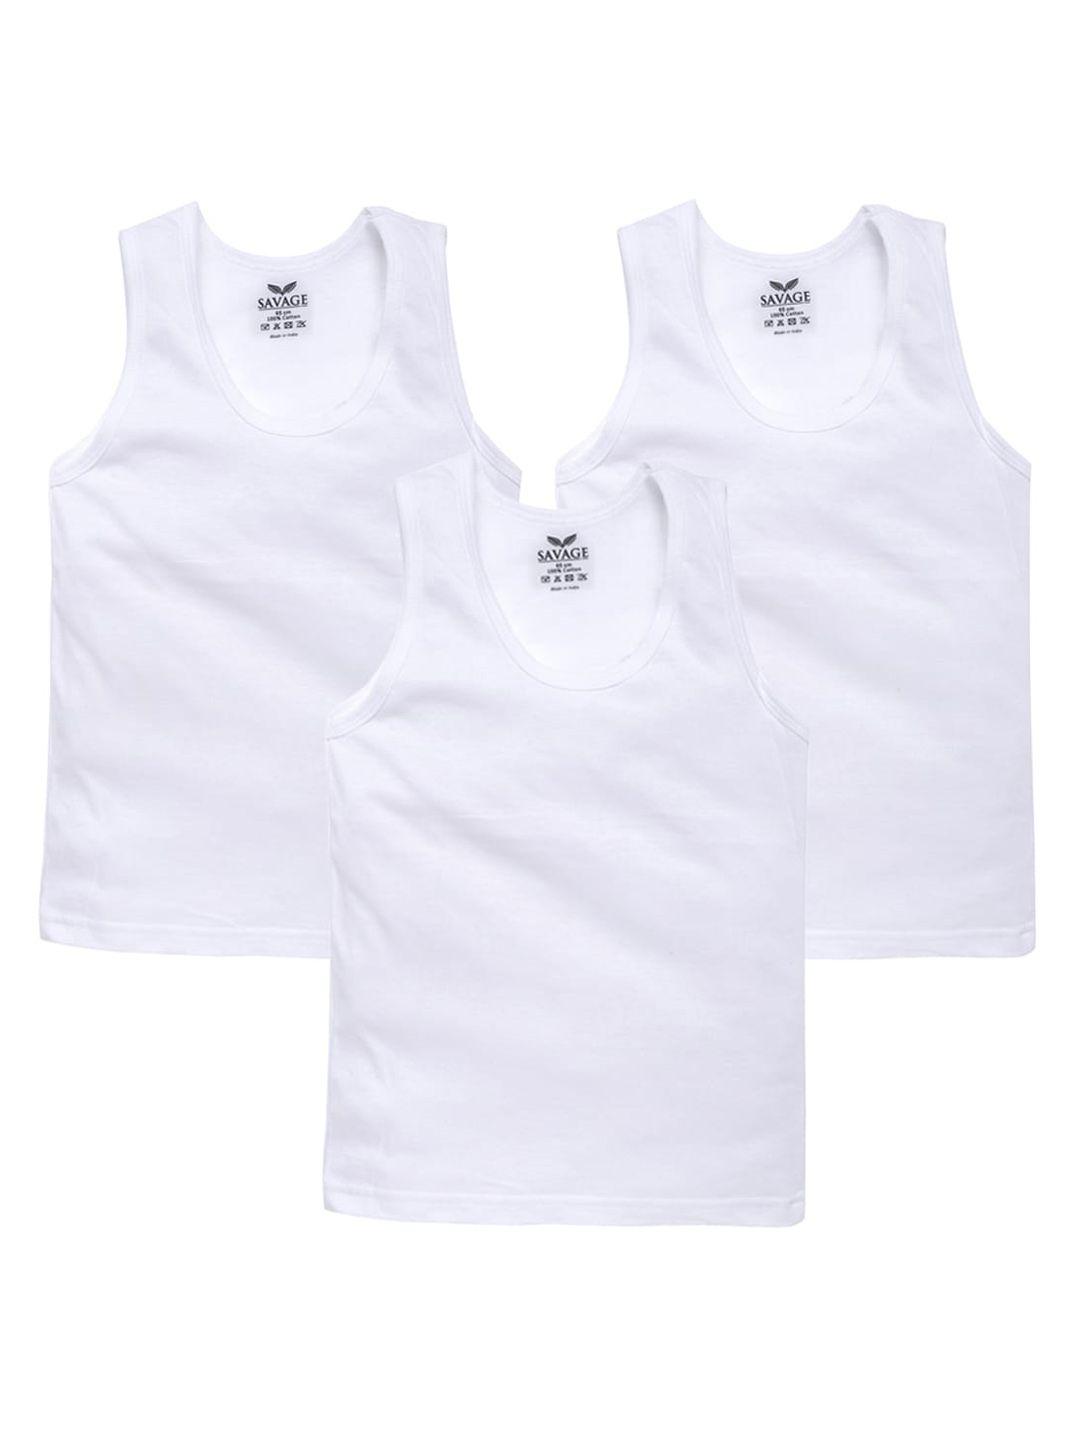 savage boys pack of 3 white solid cotton innerwear vests